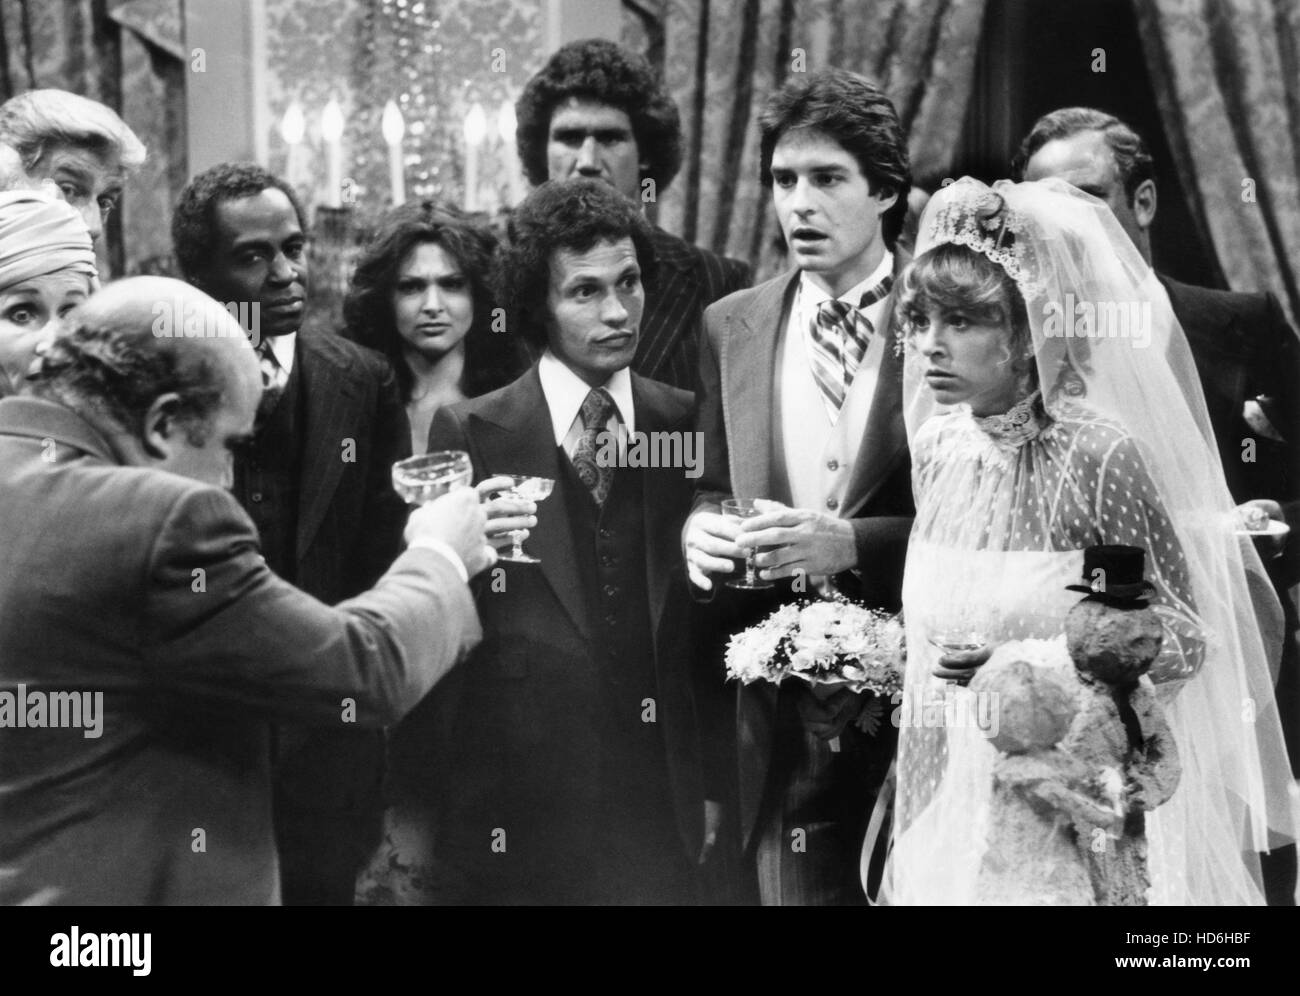 SOAP, Robert Guillaume, Billy Crystal, Ted Wass, Dinah Manoff, 1977-81 Stock Photo